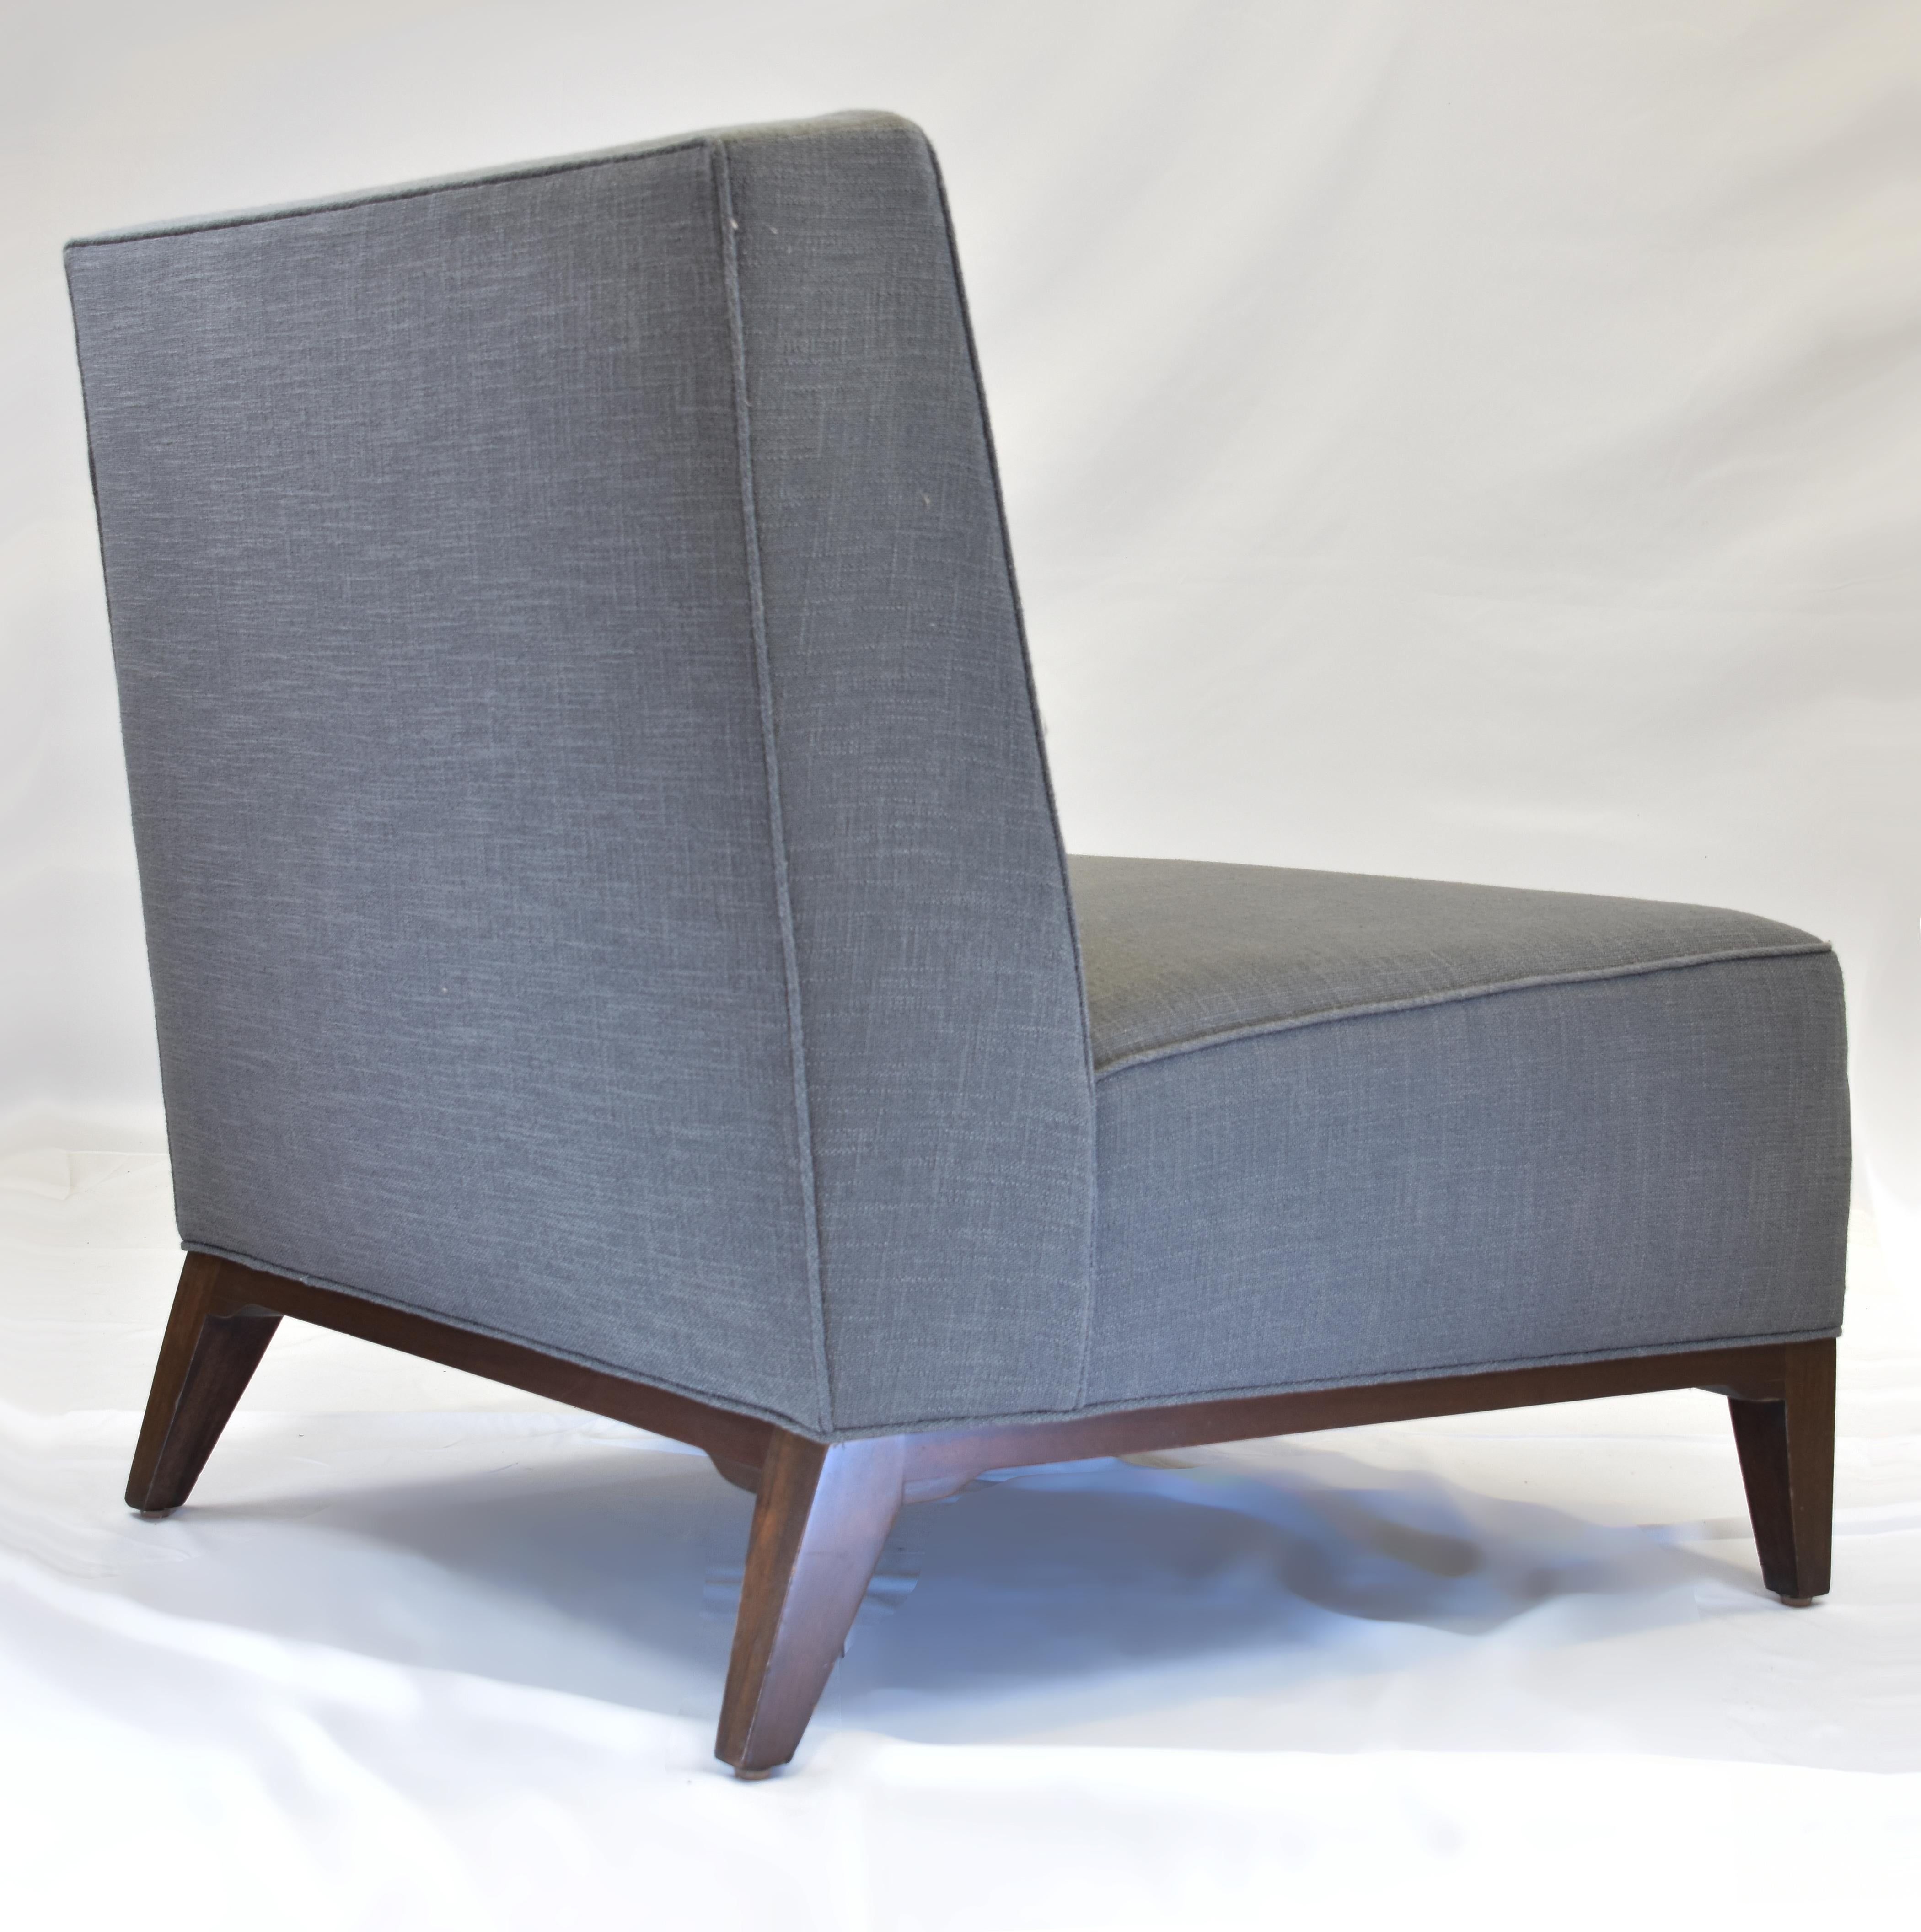 Le Jeune Upholstery Loft Slipper Chair Showroom Model In Good Condition For Sale In Miami, FL